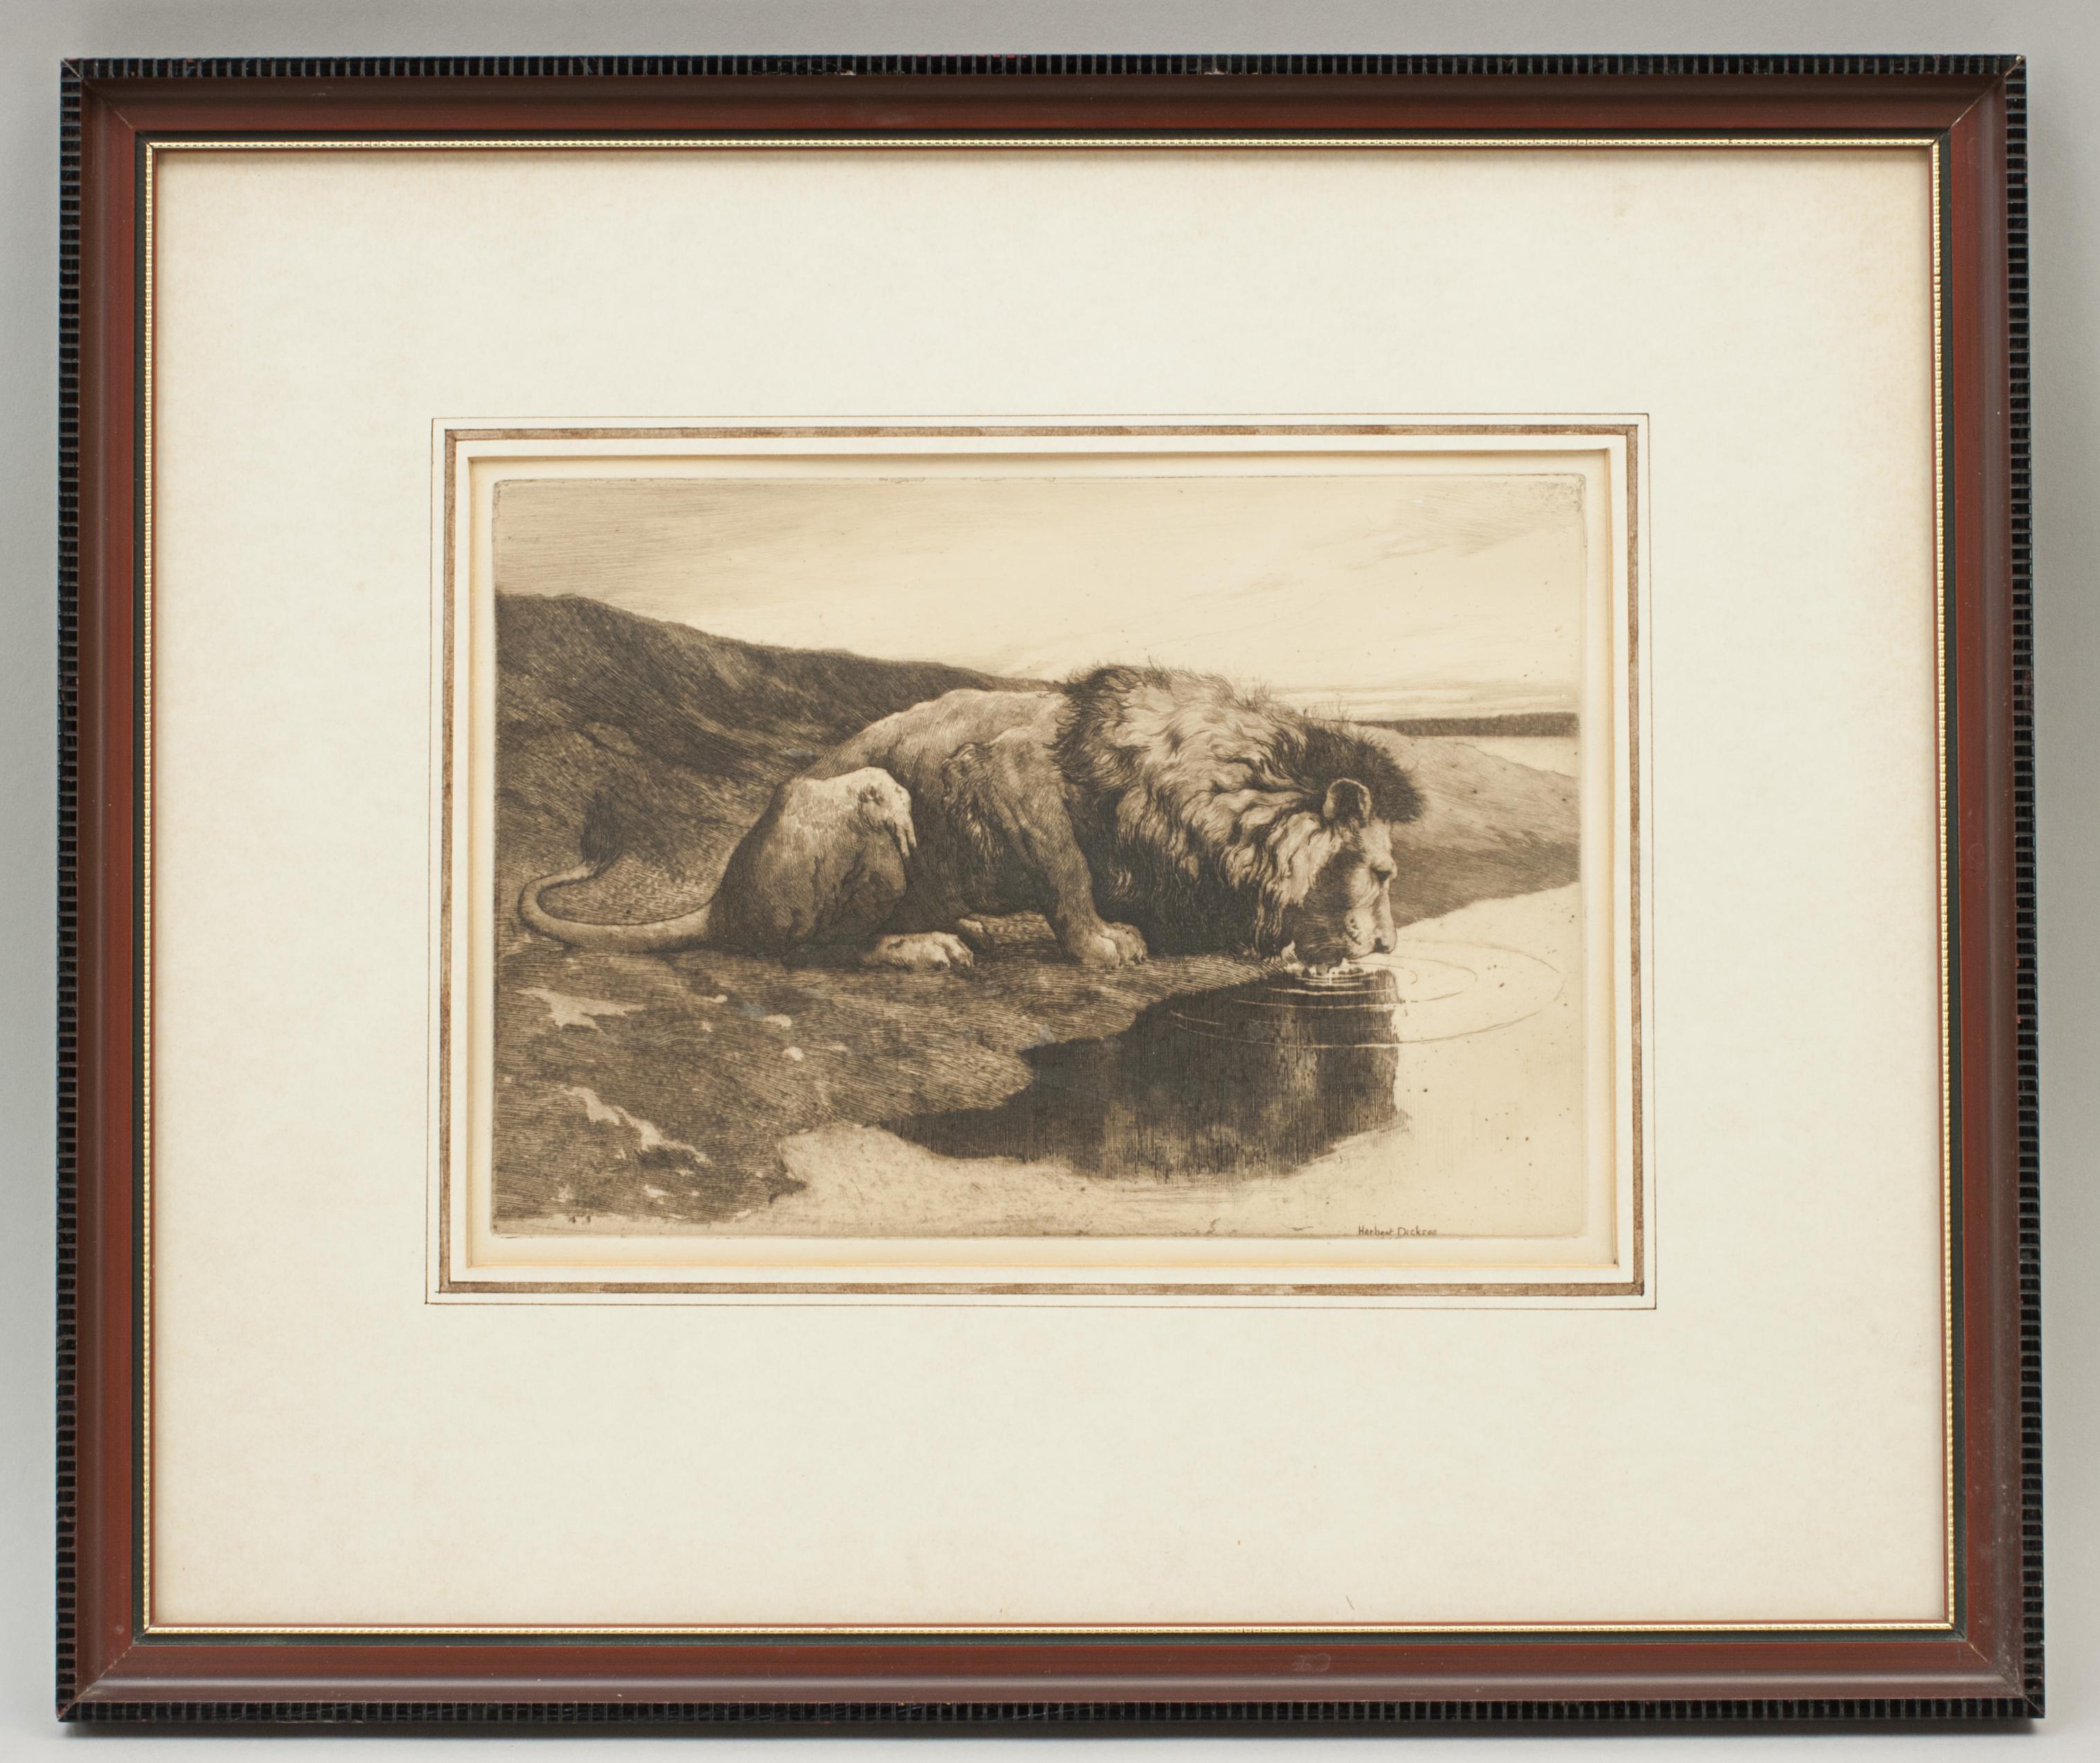 Herbert Dicksee 'A Drinking Lion'.
A wonderful original sepia toned etching of a lion drinking from the river by Herbert Dicksee. In a glazed frame with framers paper label on the back. A great image by Dicksee, the etching with printed signature